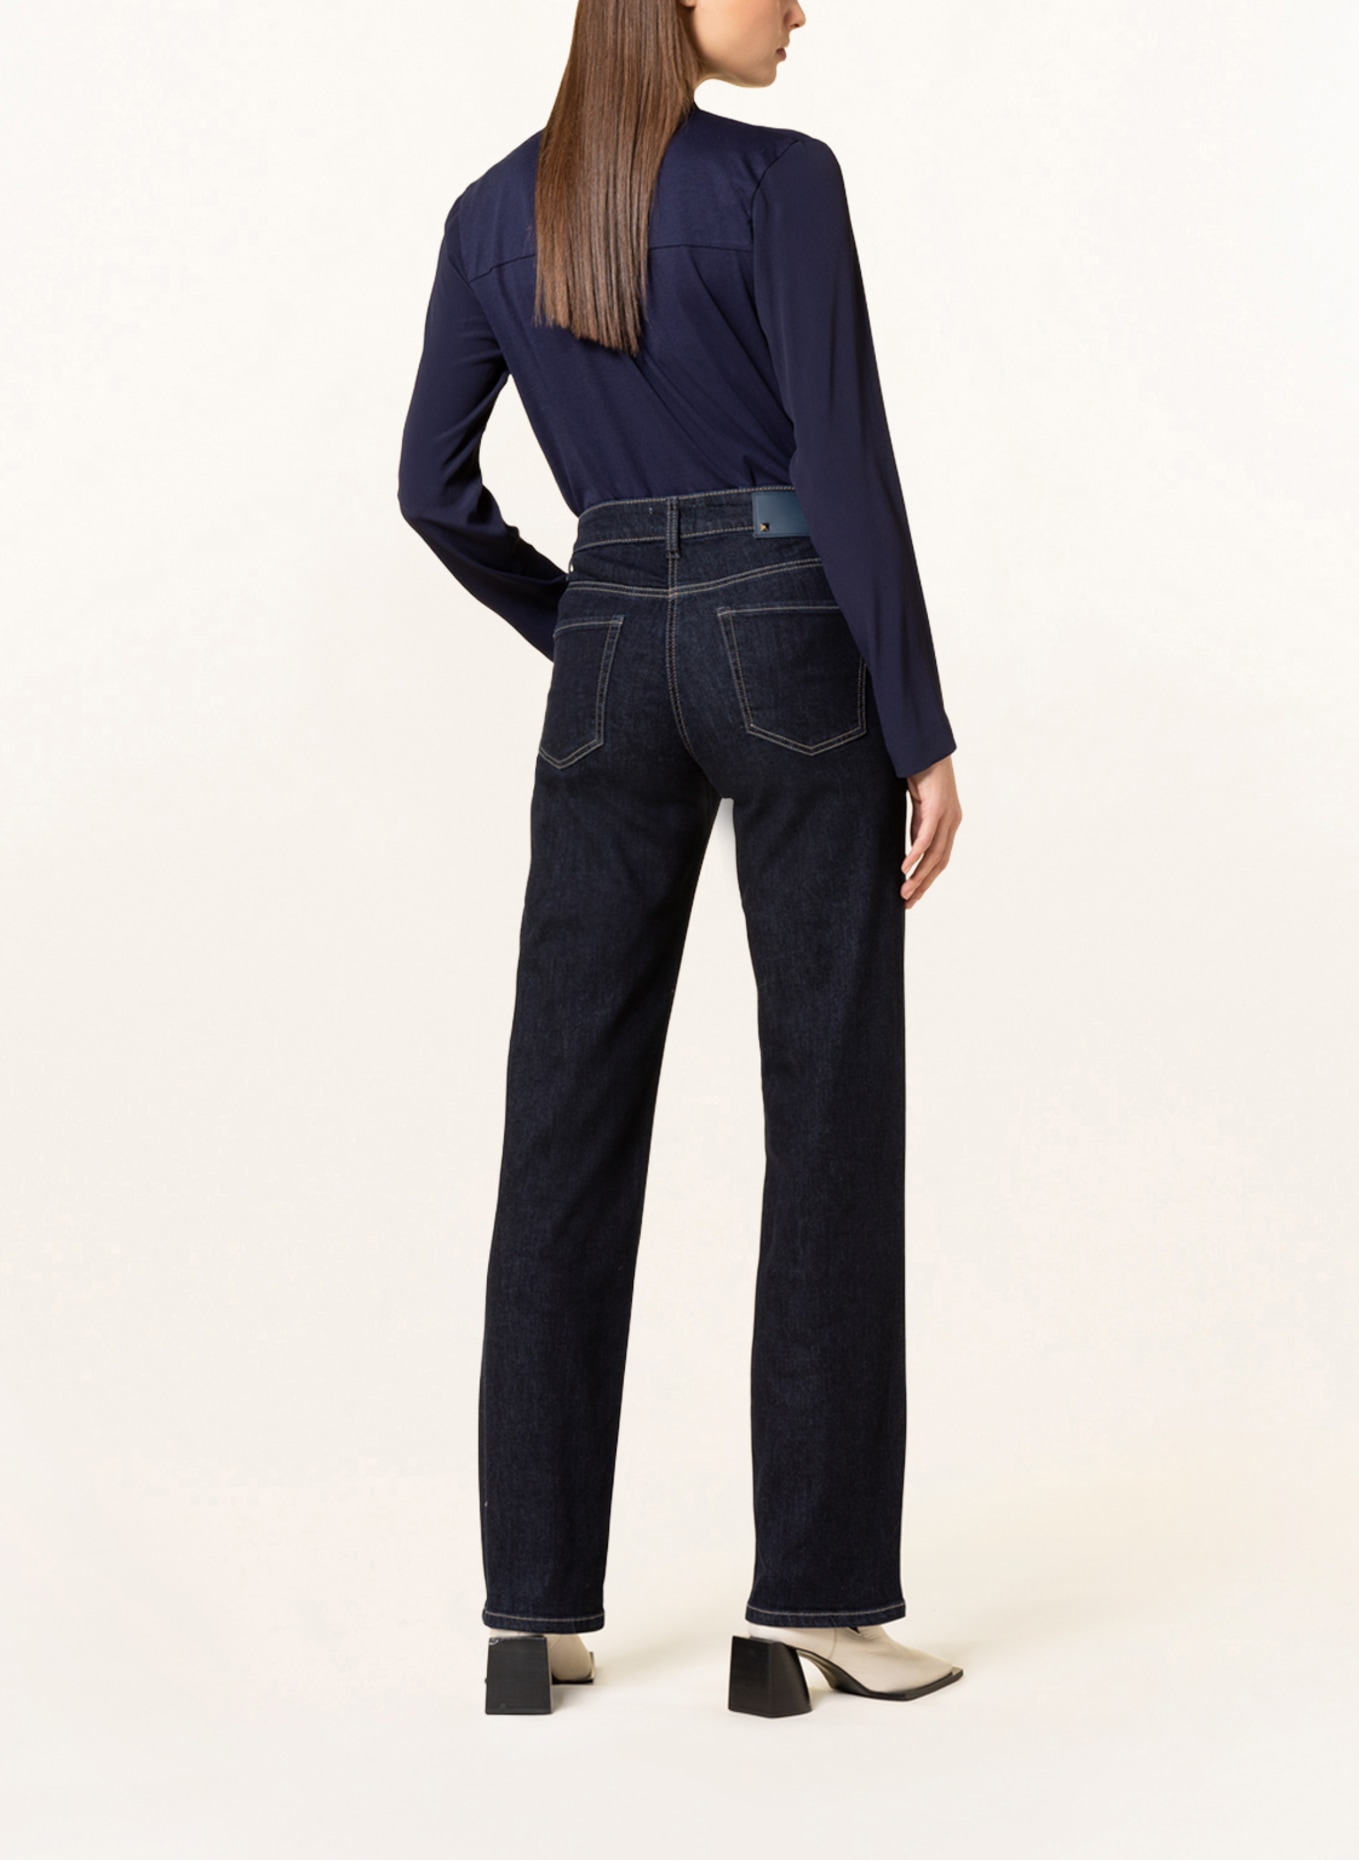 CAMBIO Straight jeans PARIS, Color: 5006 modern rinsed (Image 3)